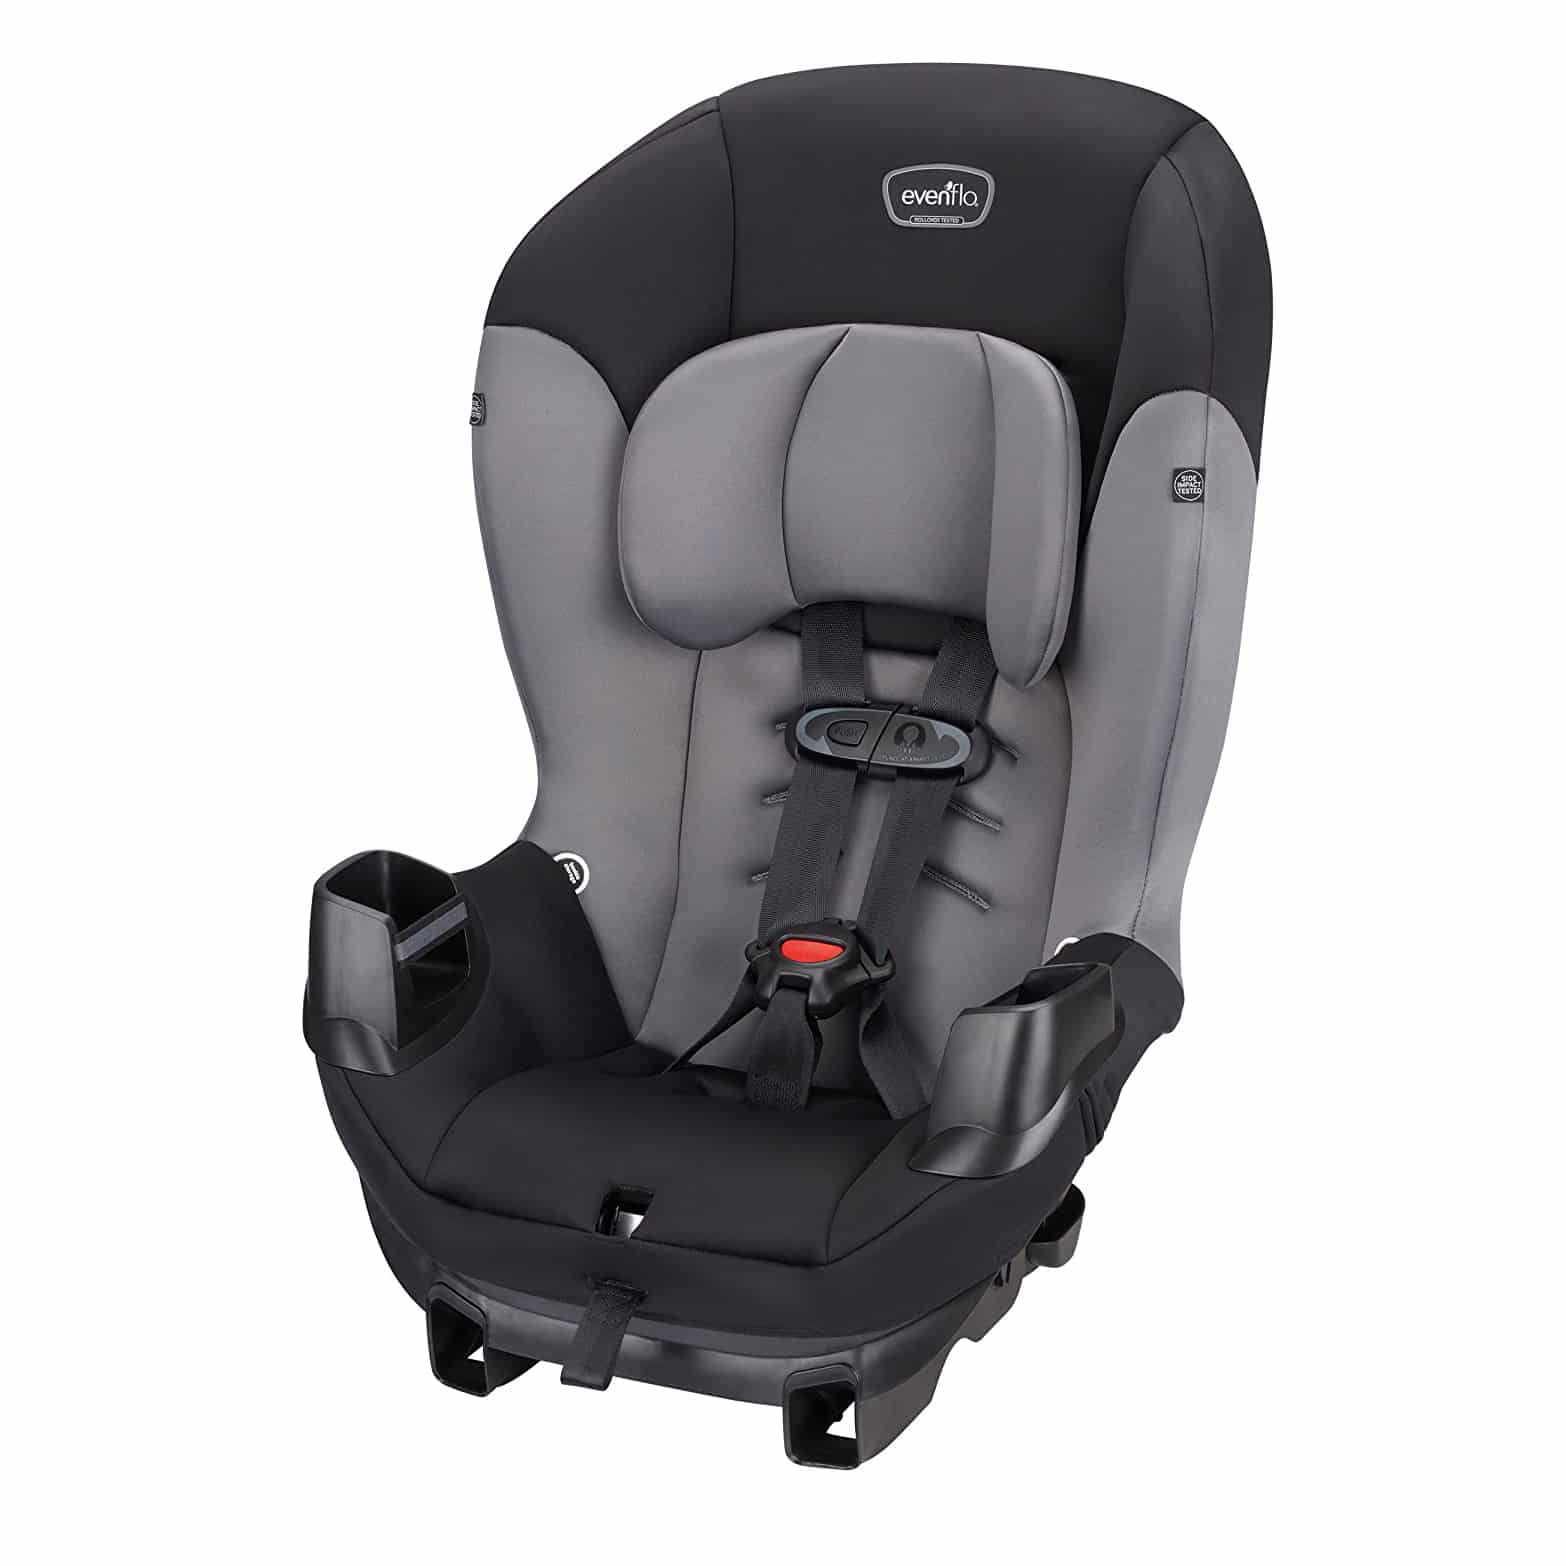 Top 10 Best Convertible Car Seats in 2021 Reviews Buyer’s Guide